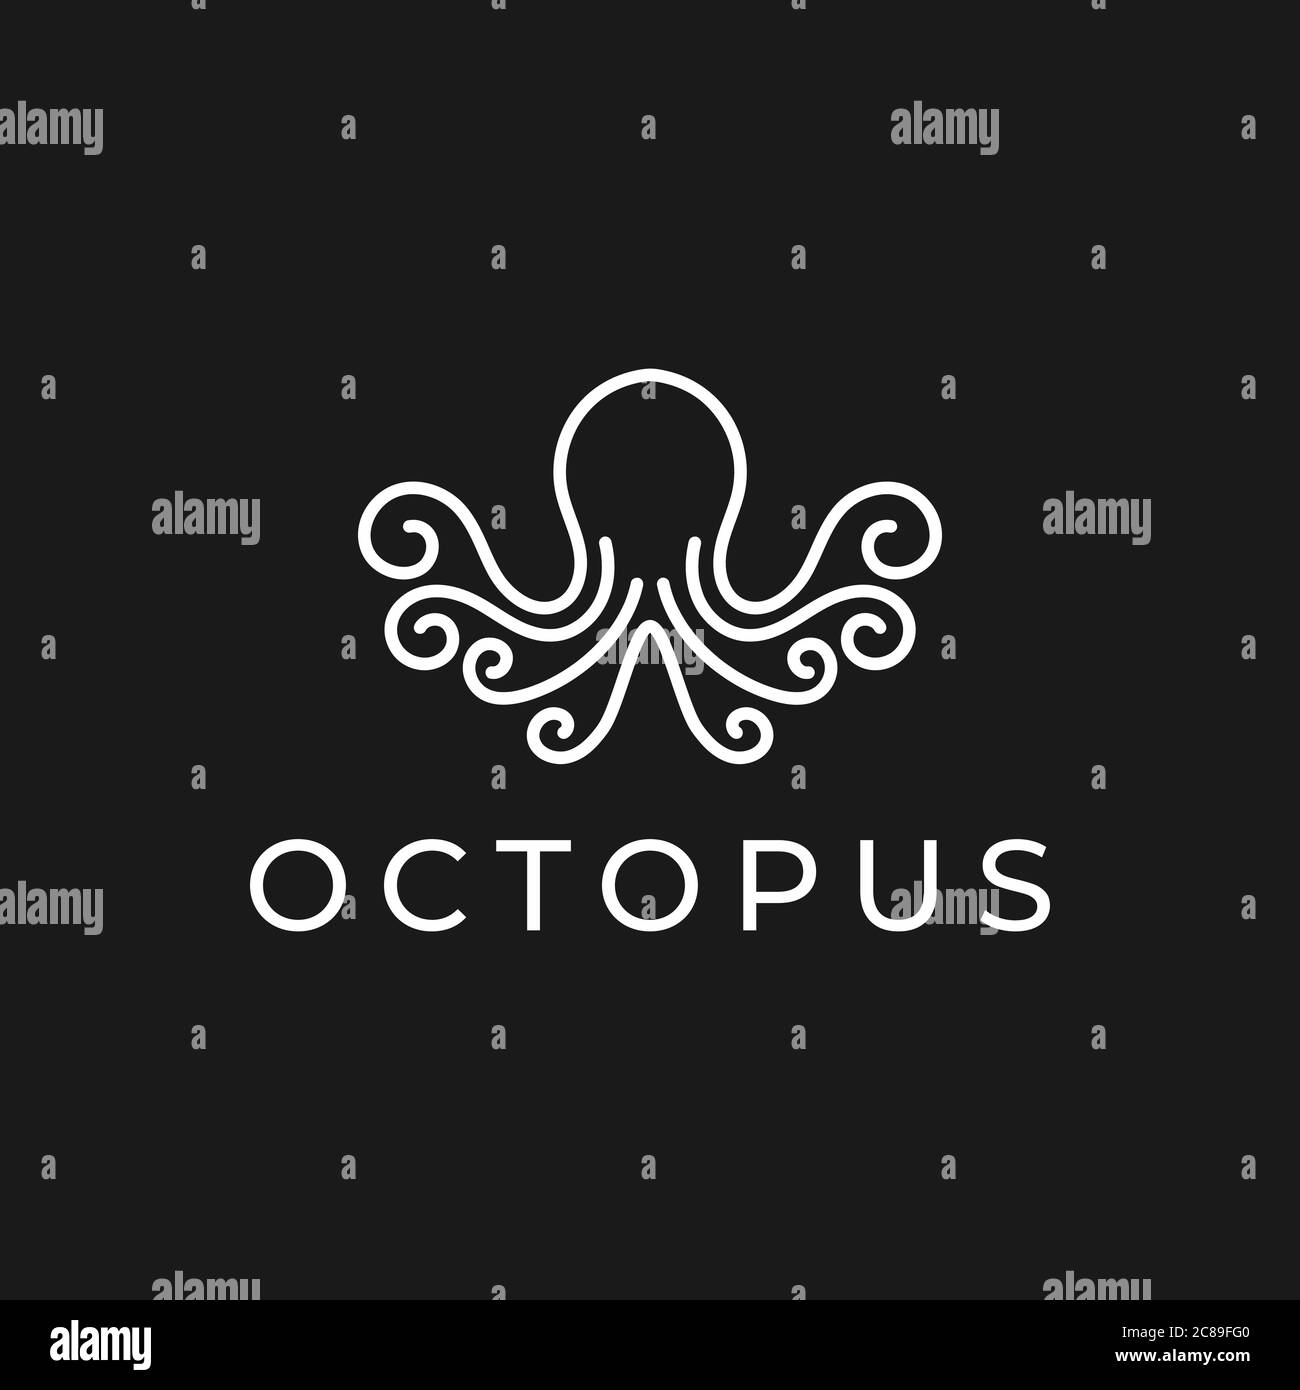 Octopus logo design template with line art style. creative octopus icon vector illustration Stock Vector